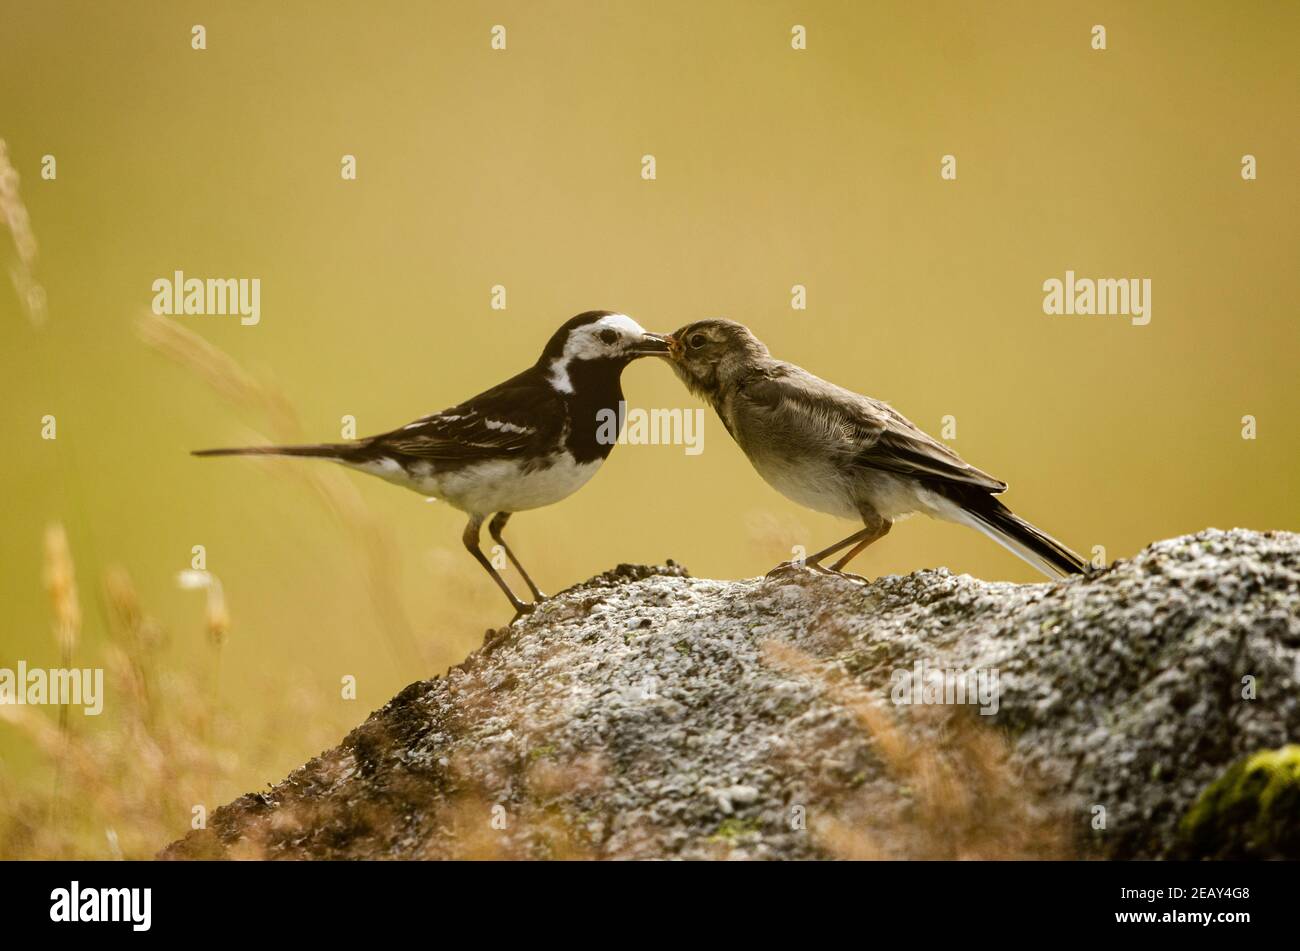 adult Pies Wagtail Feeding young bird. Stock Photo